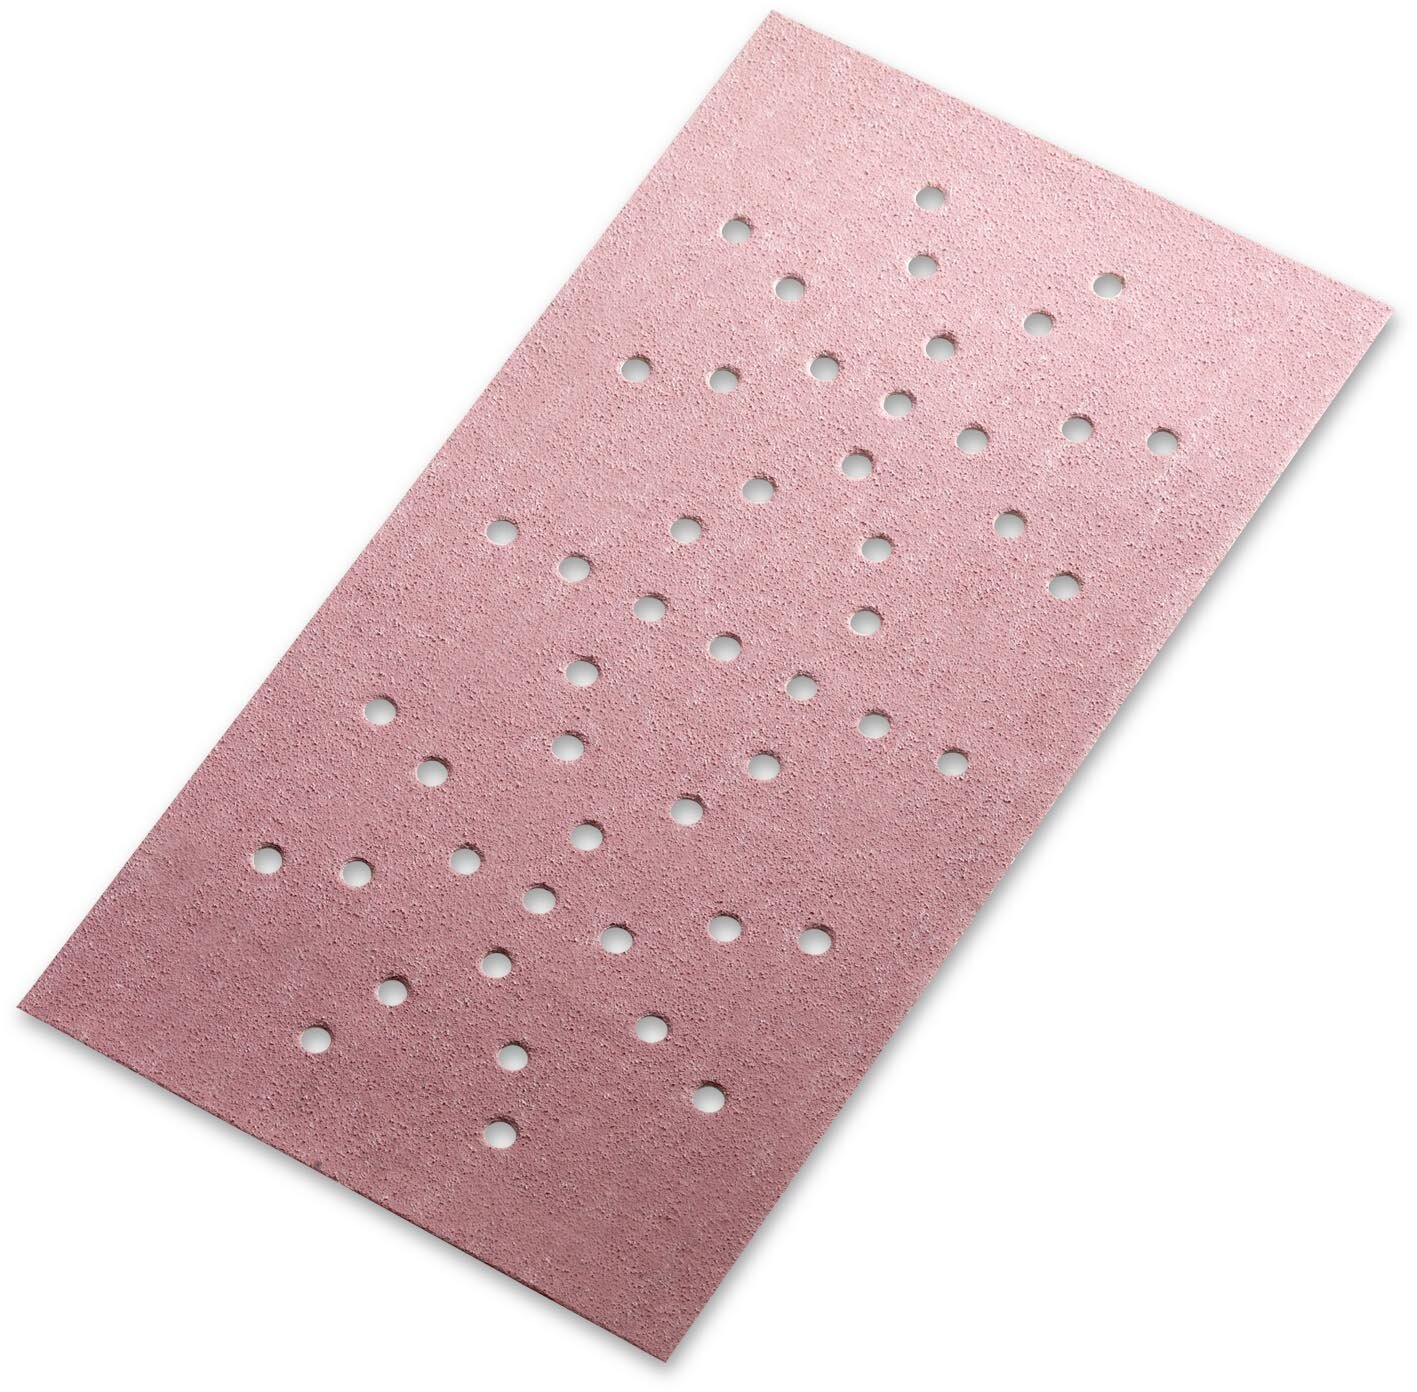 siaspeed sandpaper 115x230mm 49 hole grit 320 (100 pieces)